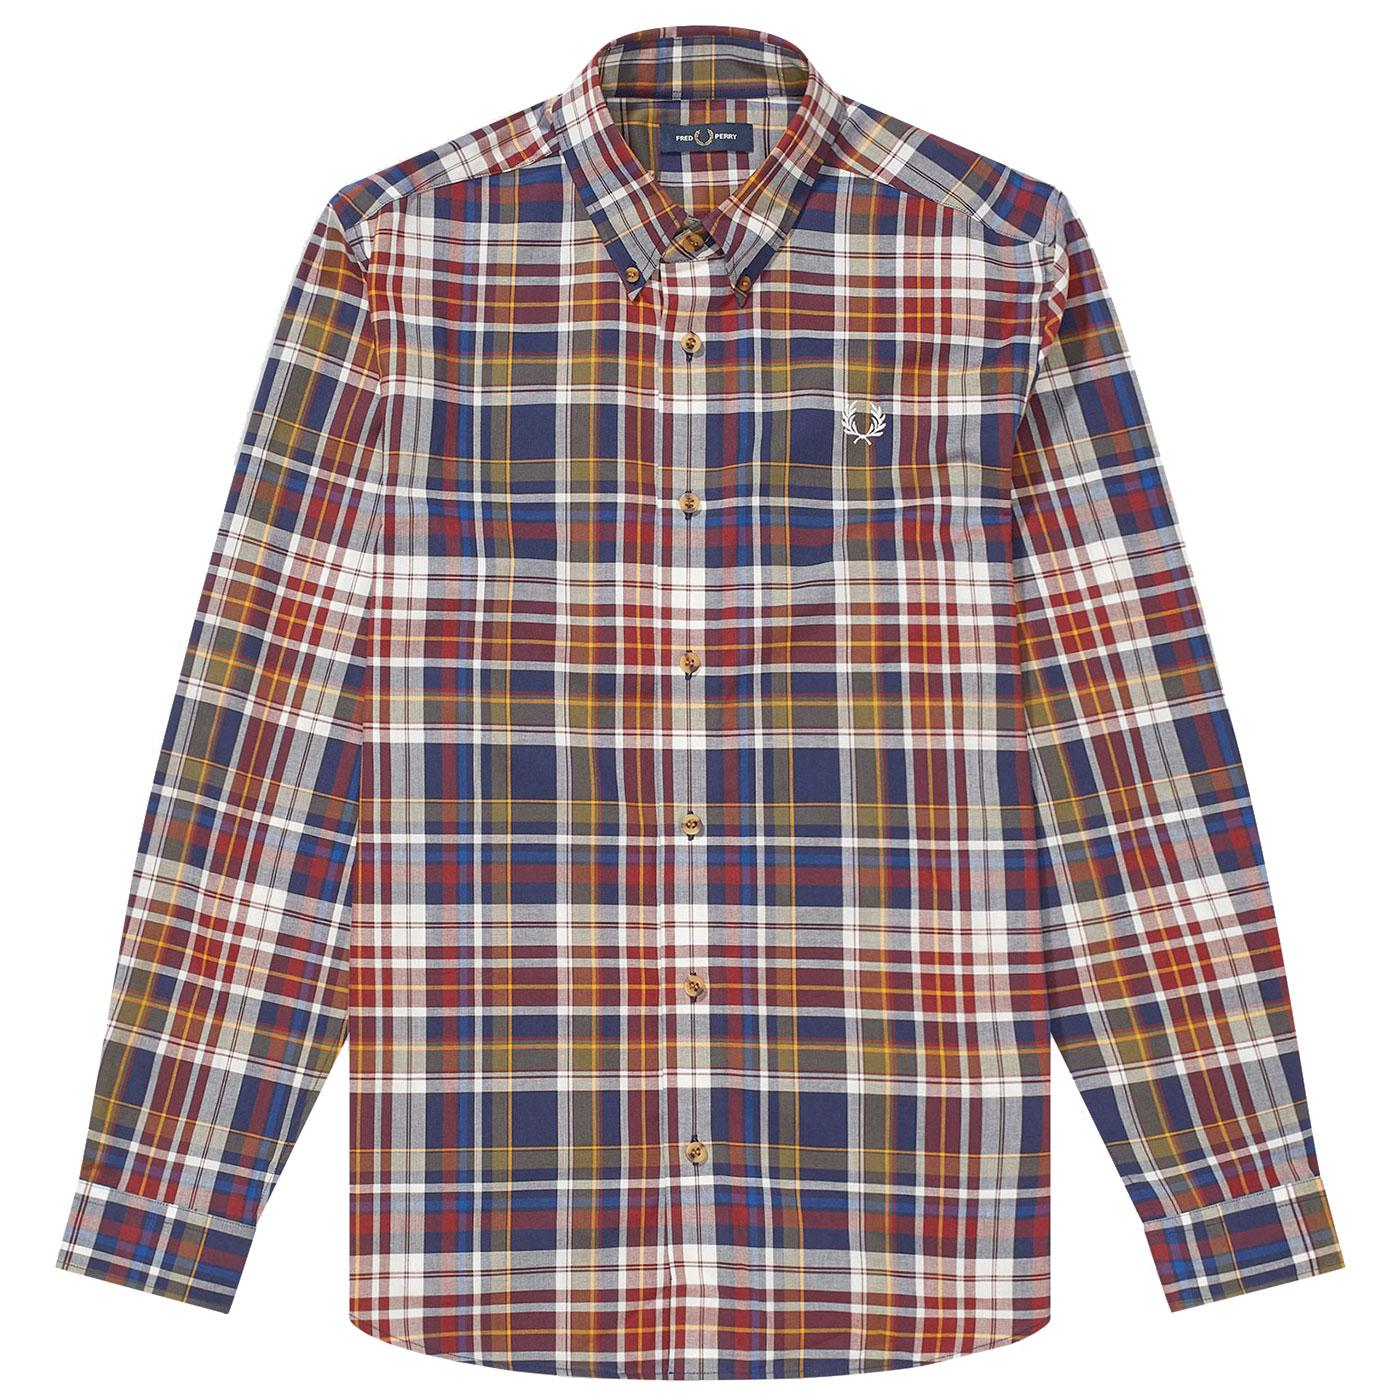 FRED PERRY Retro Button Down Tartan Check Shirt in Navy